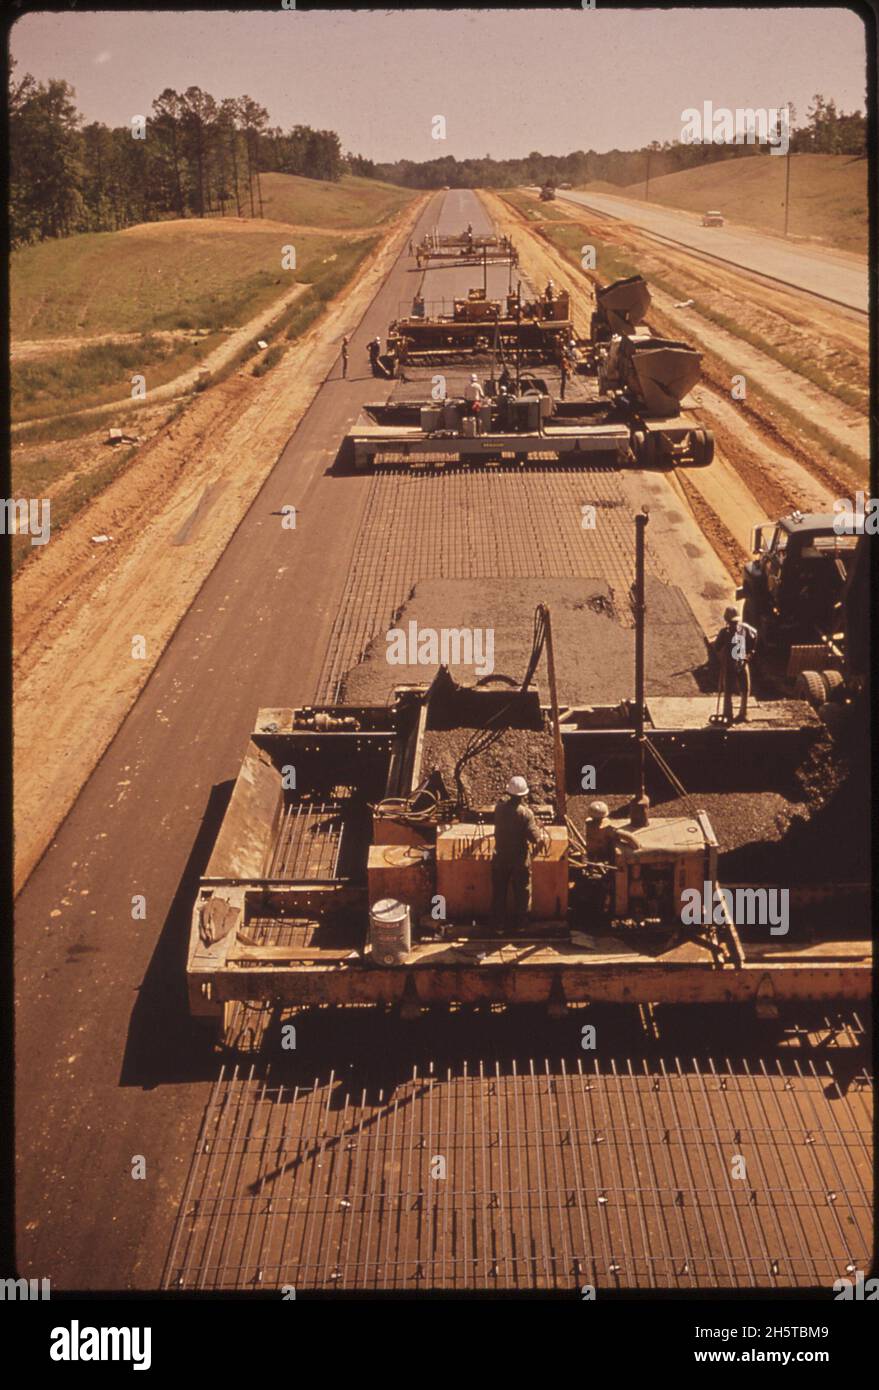 Steel rods made from shredded autos are being used for reinforcement during the construction of this section of I-55, North of Durant, MS. 5/1972. Stock Photo